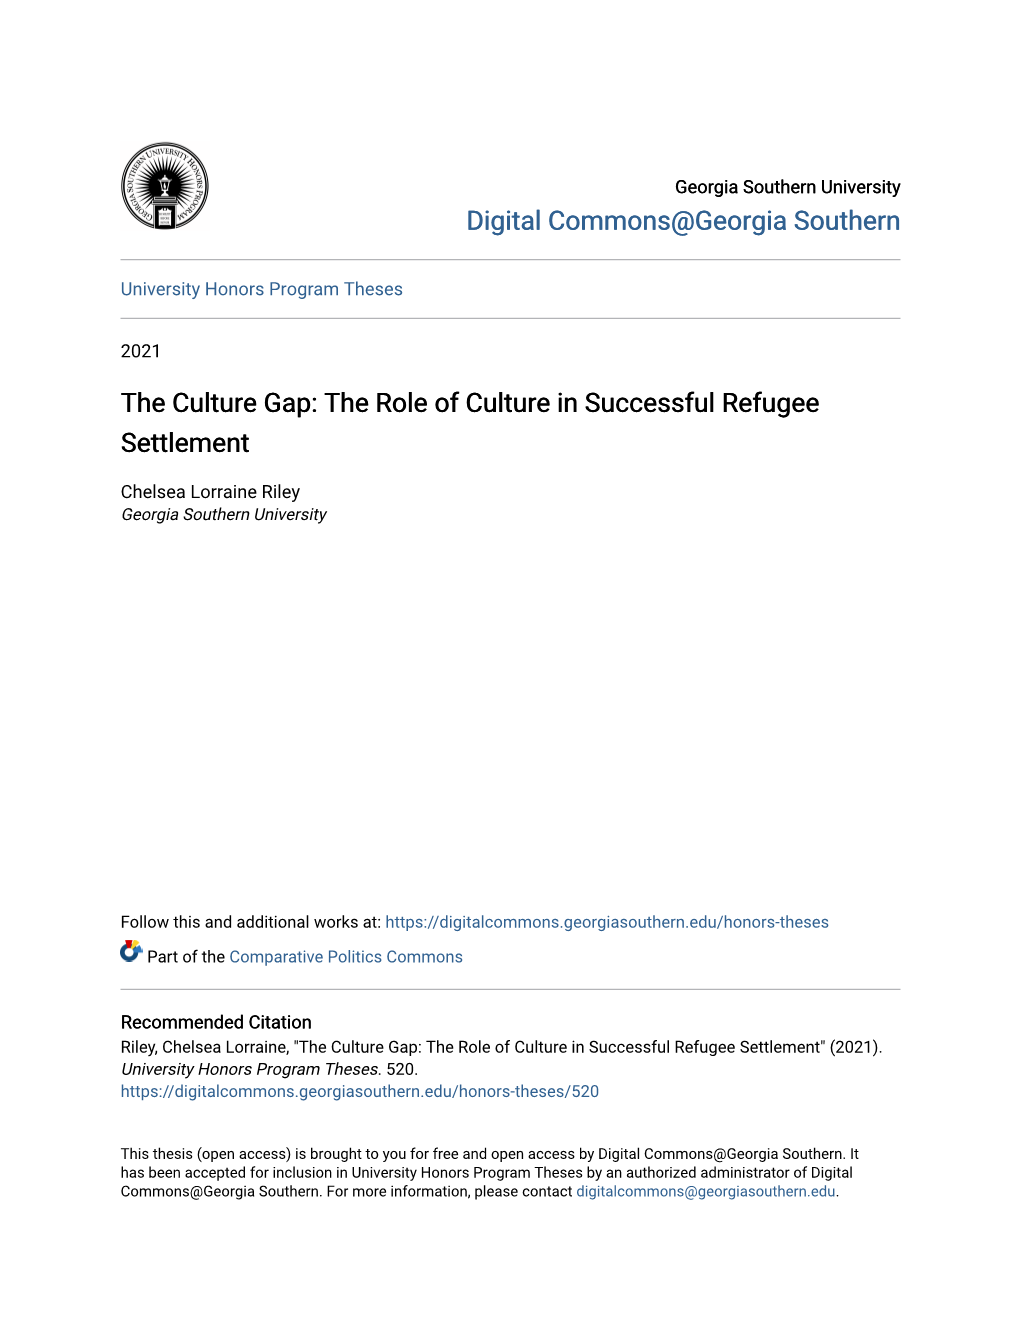 The Culture Gap: the Role of Culture in Successful Refugee Settlement